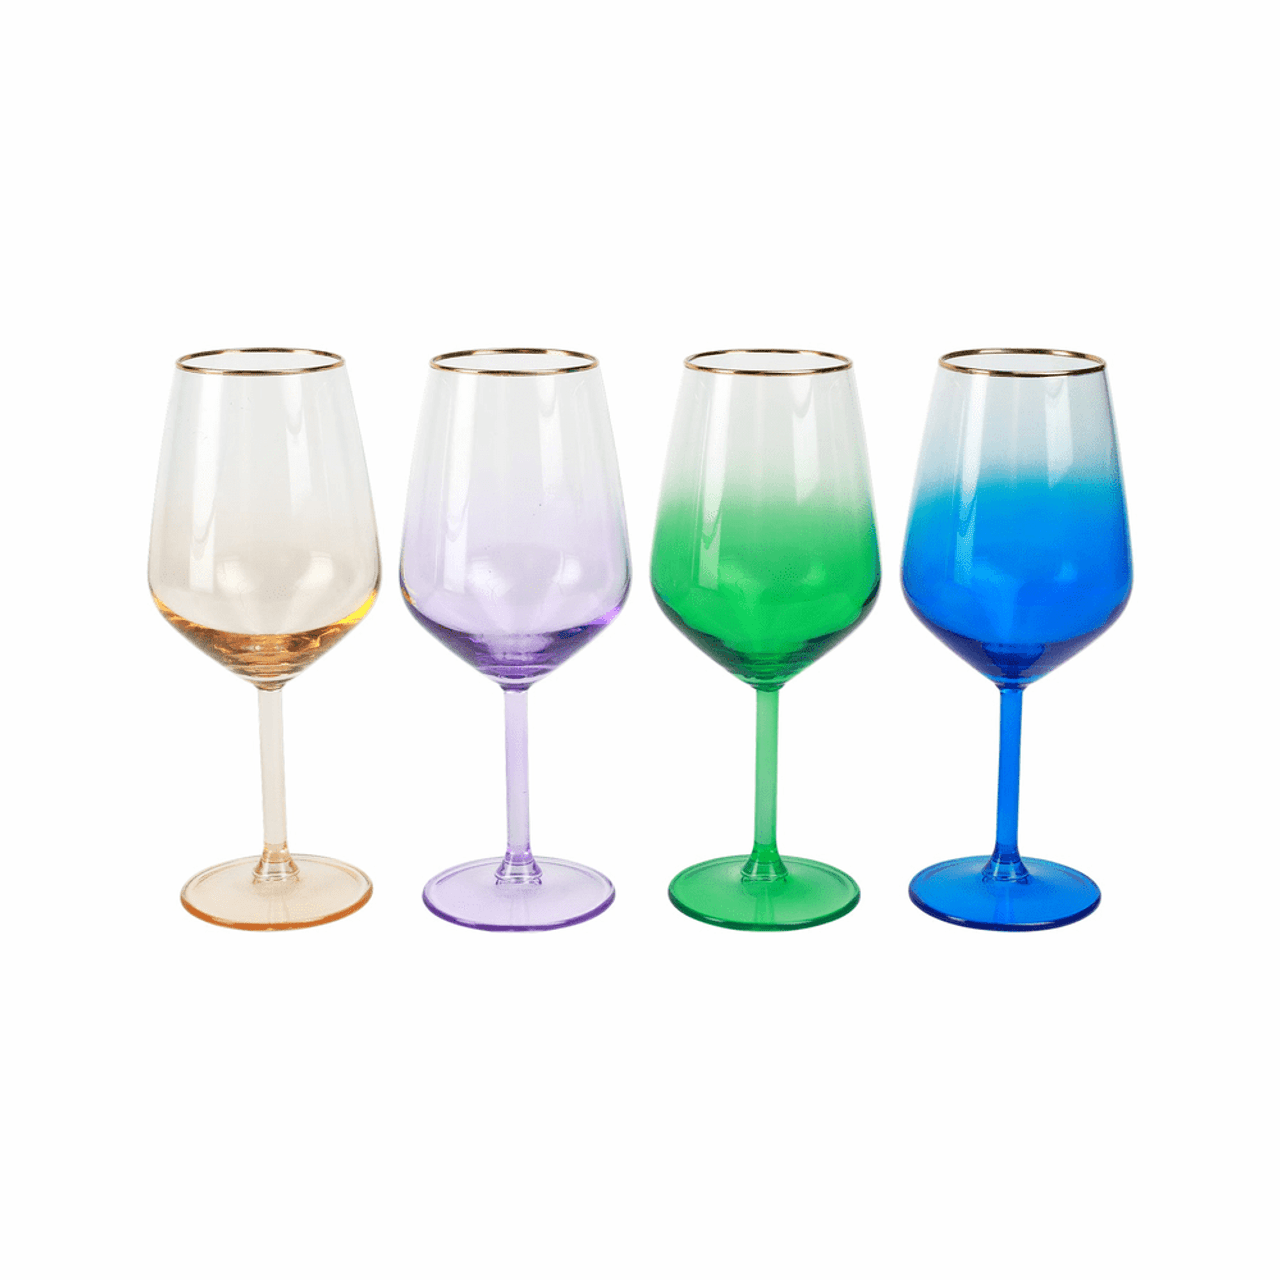 https://cdn11.bigcommerce.com/s-e0xlh4avpe/images/stencil/1280x1280/products/115462/153771/vietri-rainbow-jewel-tone-assorted-wine-glasses-set-of-4-9__35933.1650944493.png?c=1